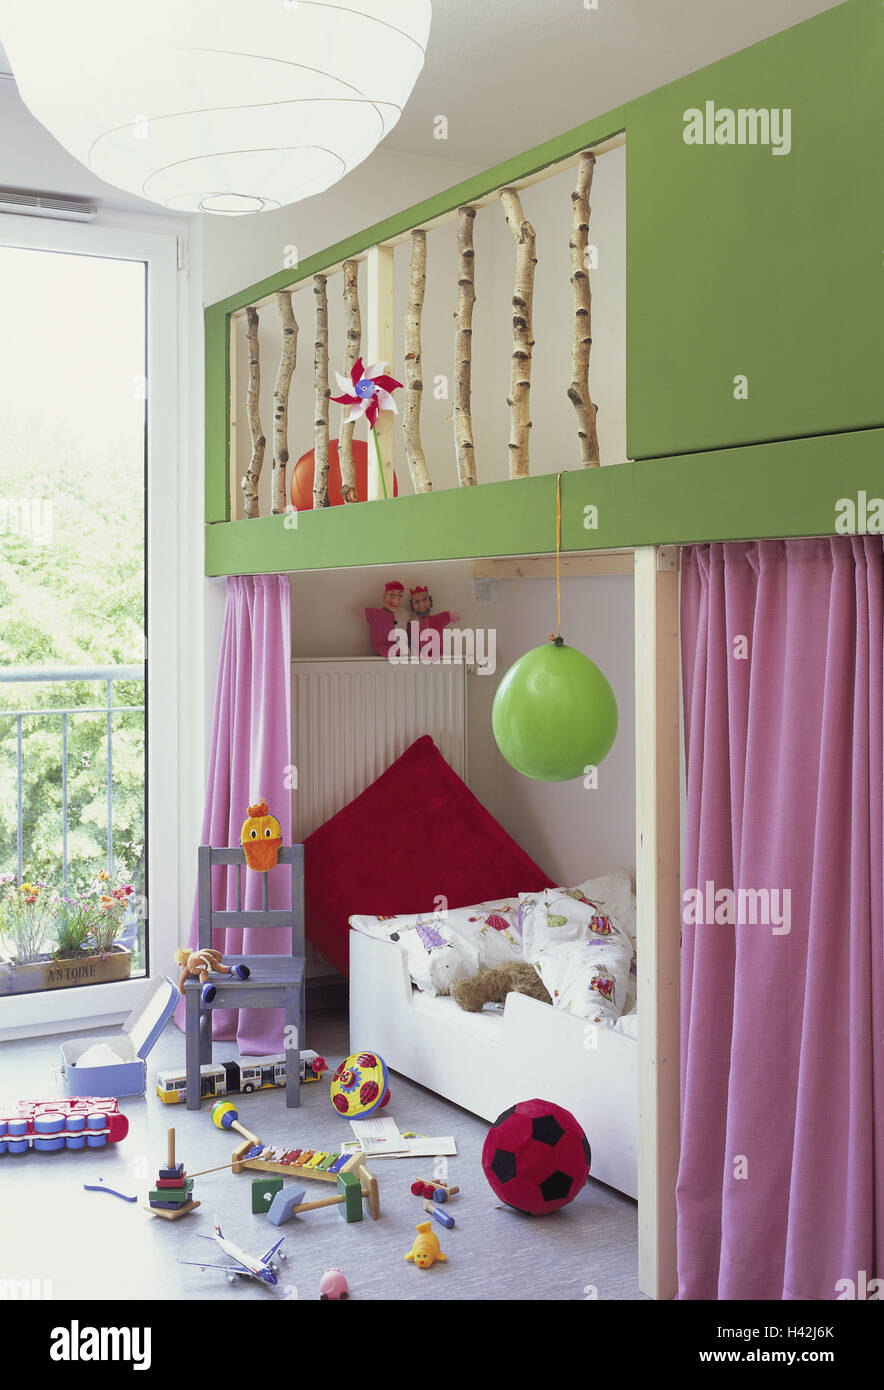 Nursery, bed, chair, toys, cluttered, Stock Photo